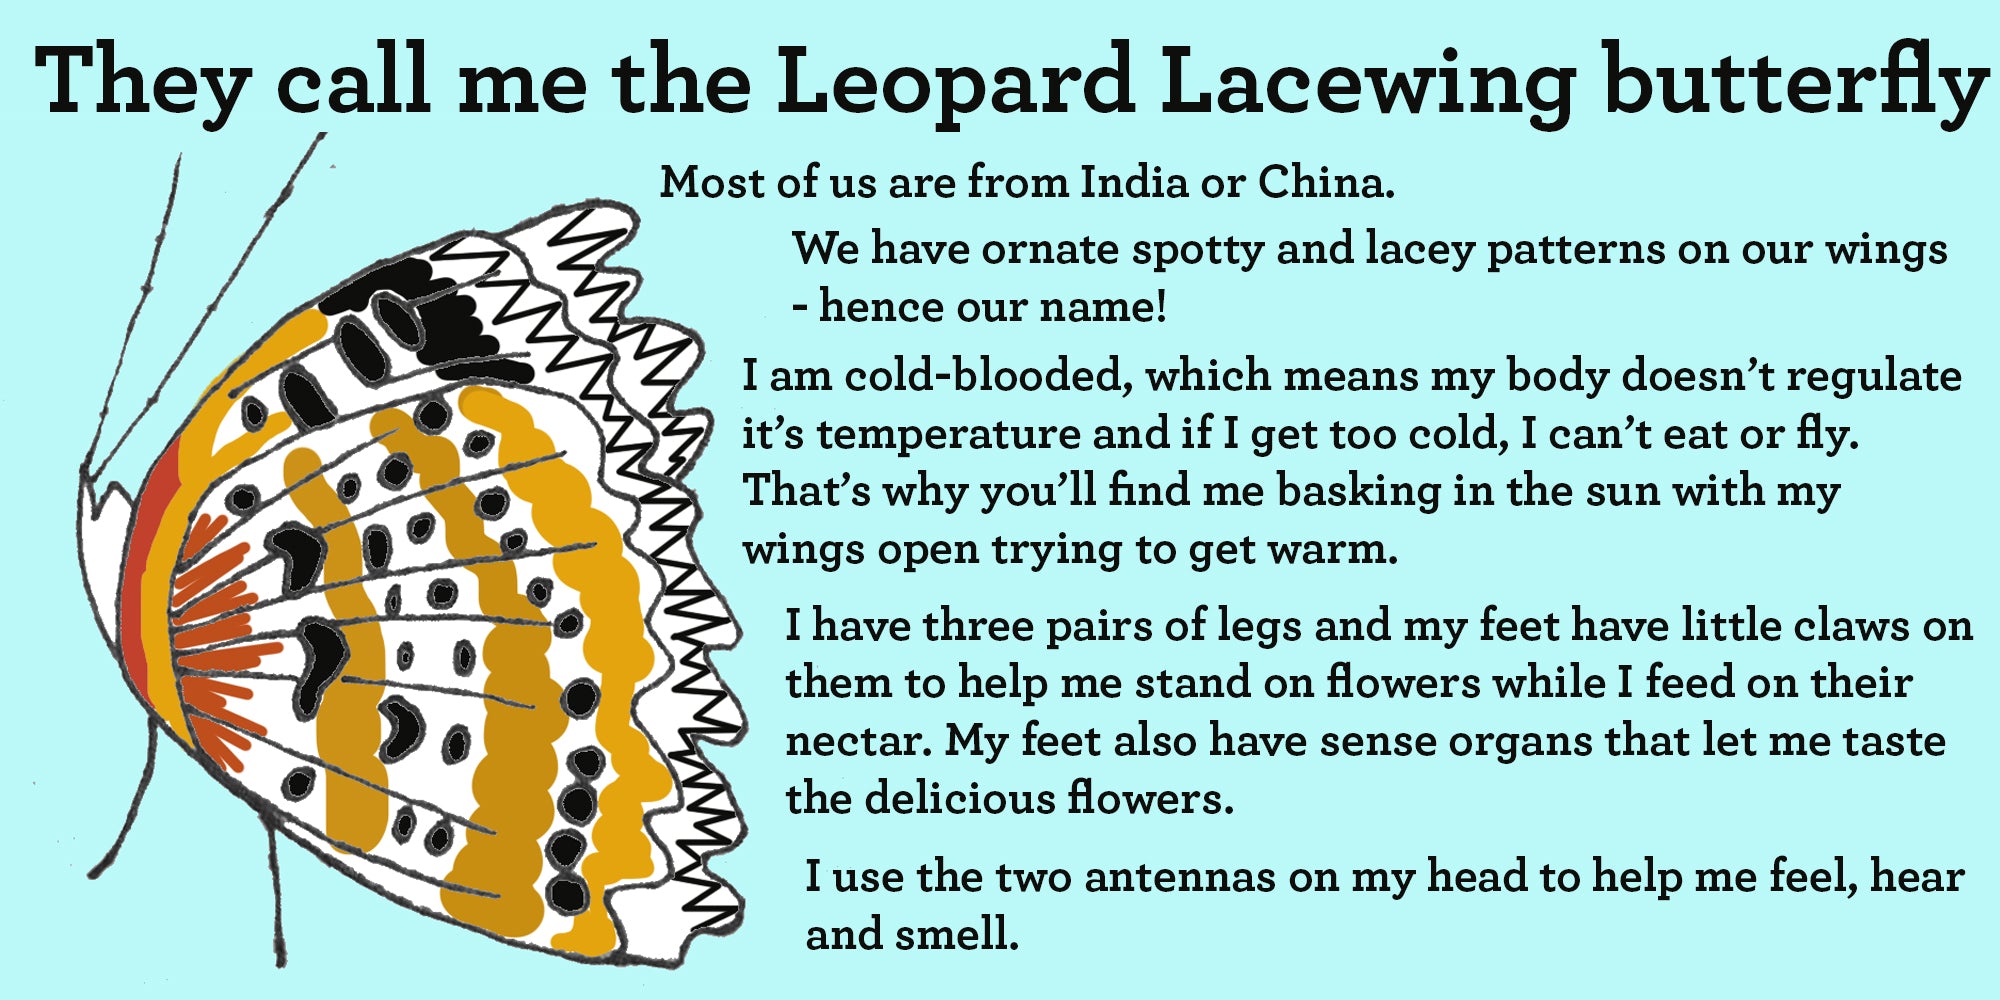 leopard lacewing butterfly facts and info